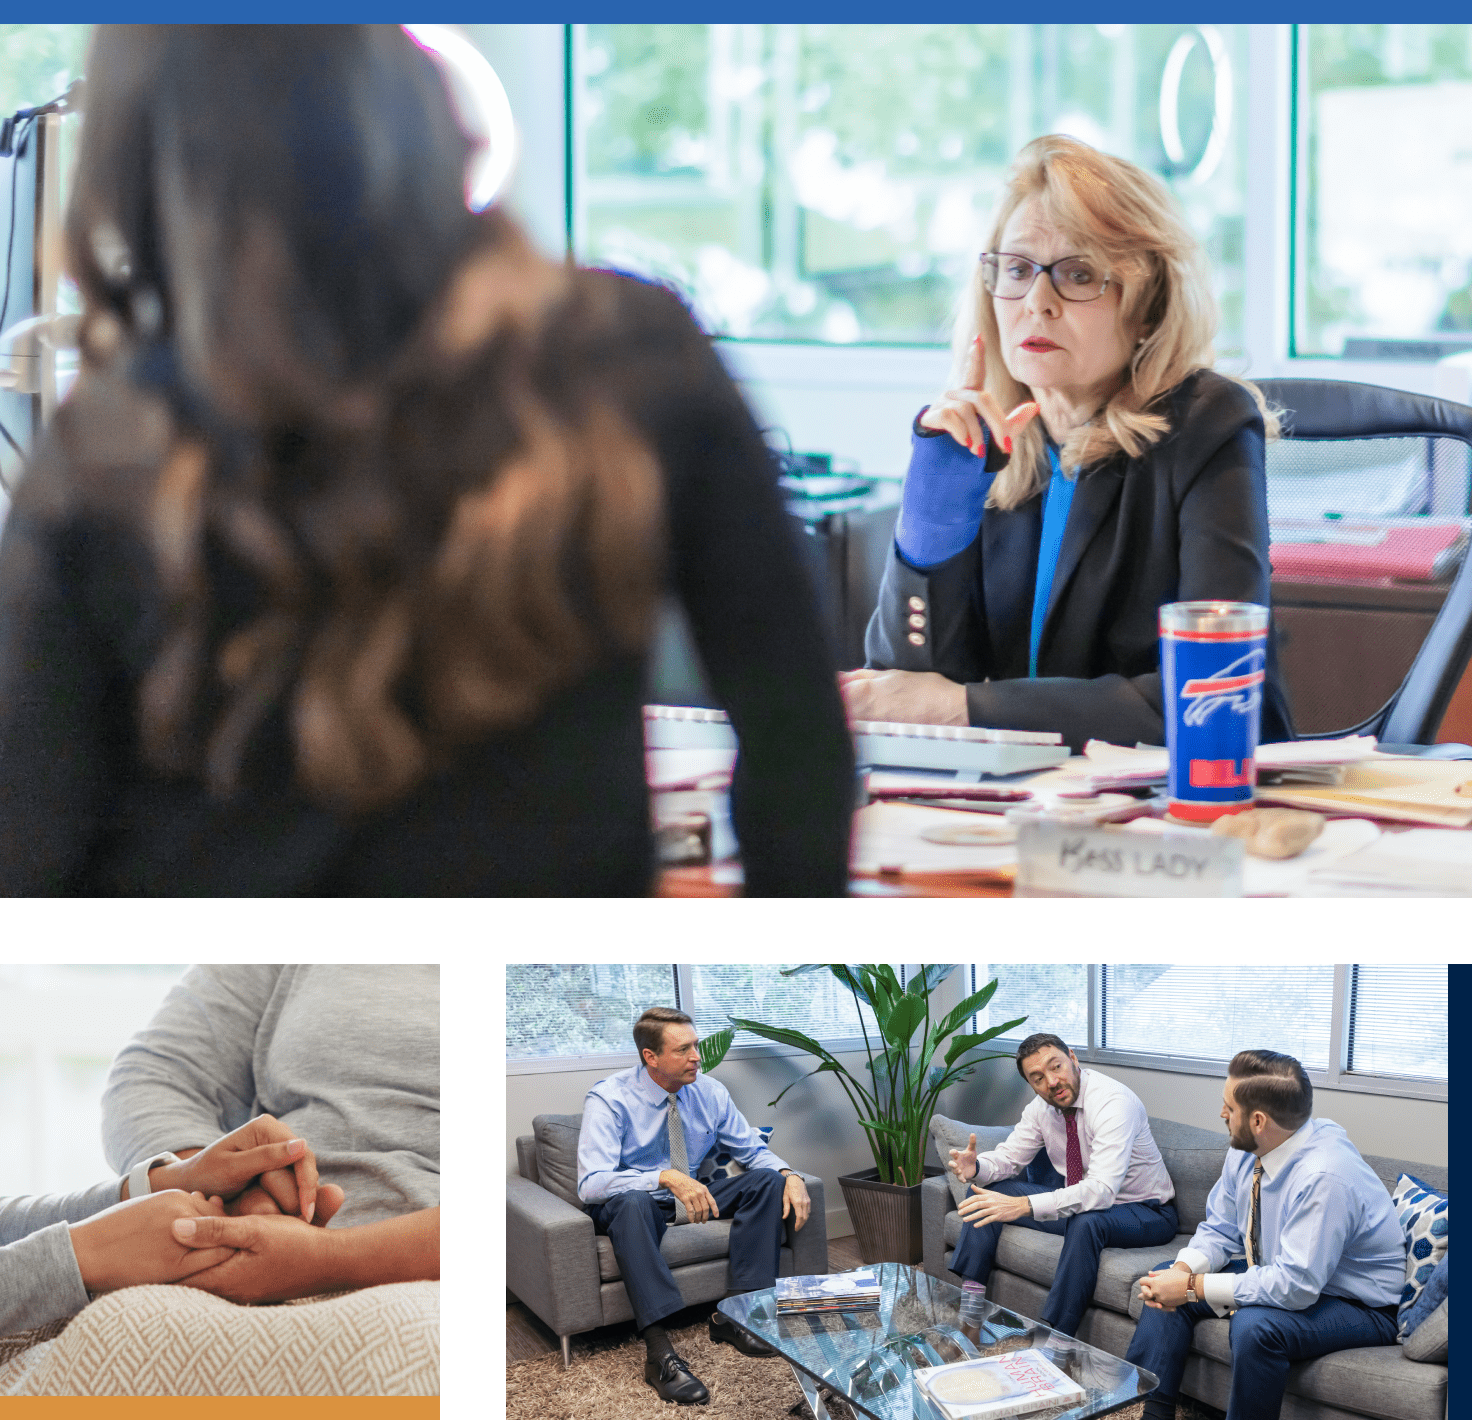 Collage: serious office meeting, hand comfort, casual office chat.